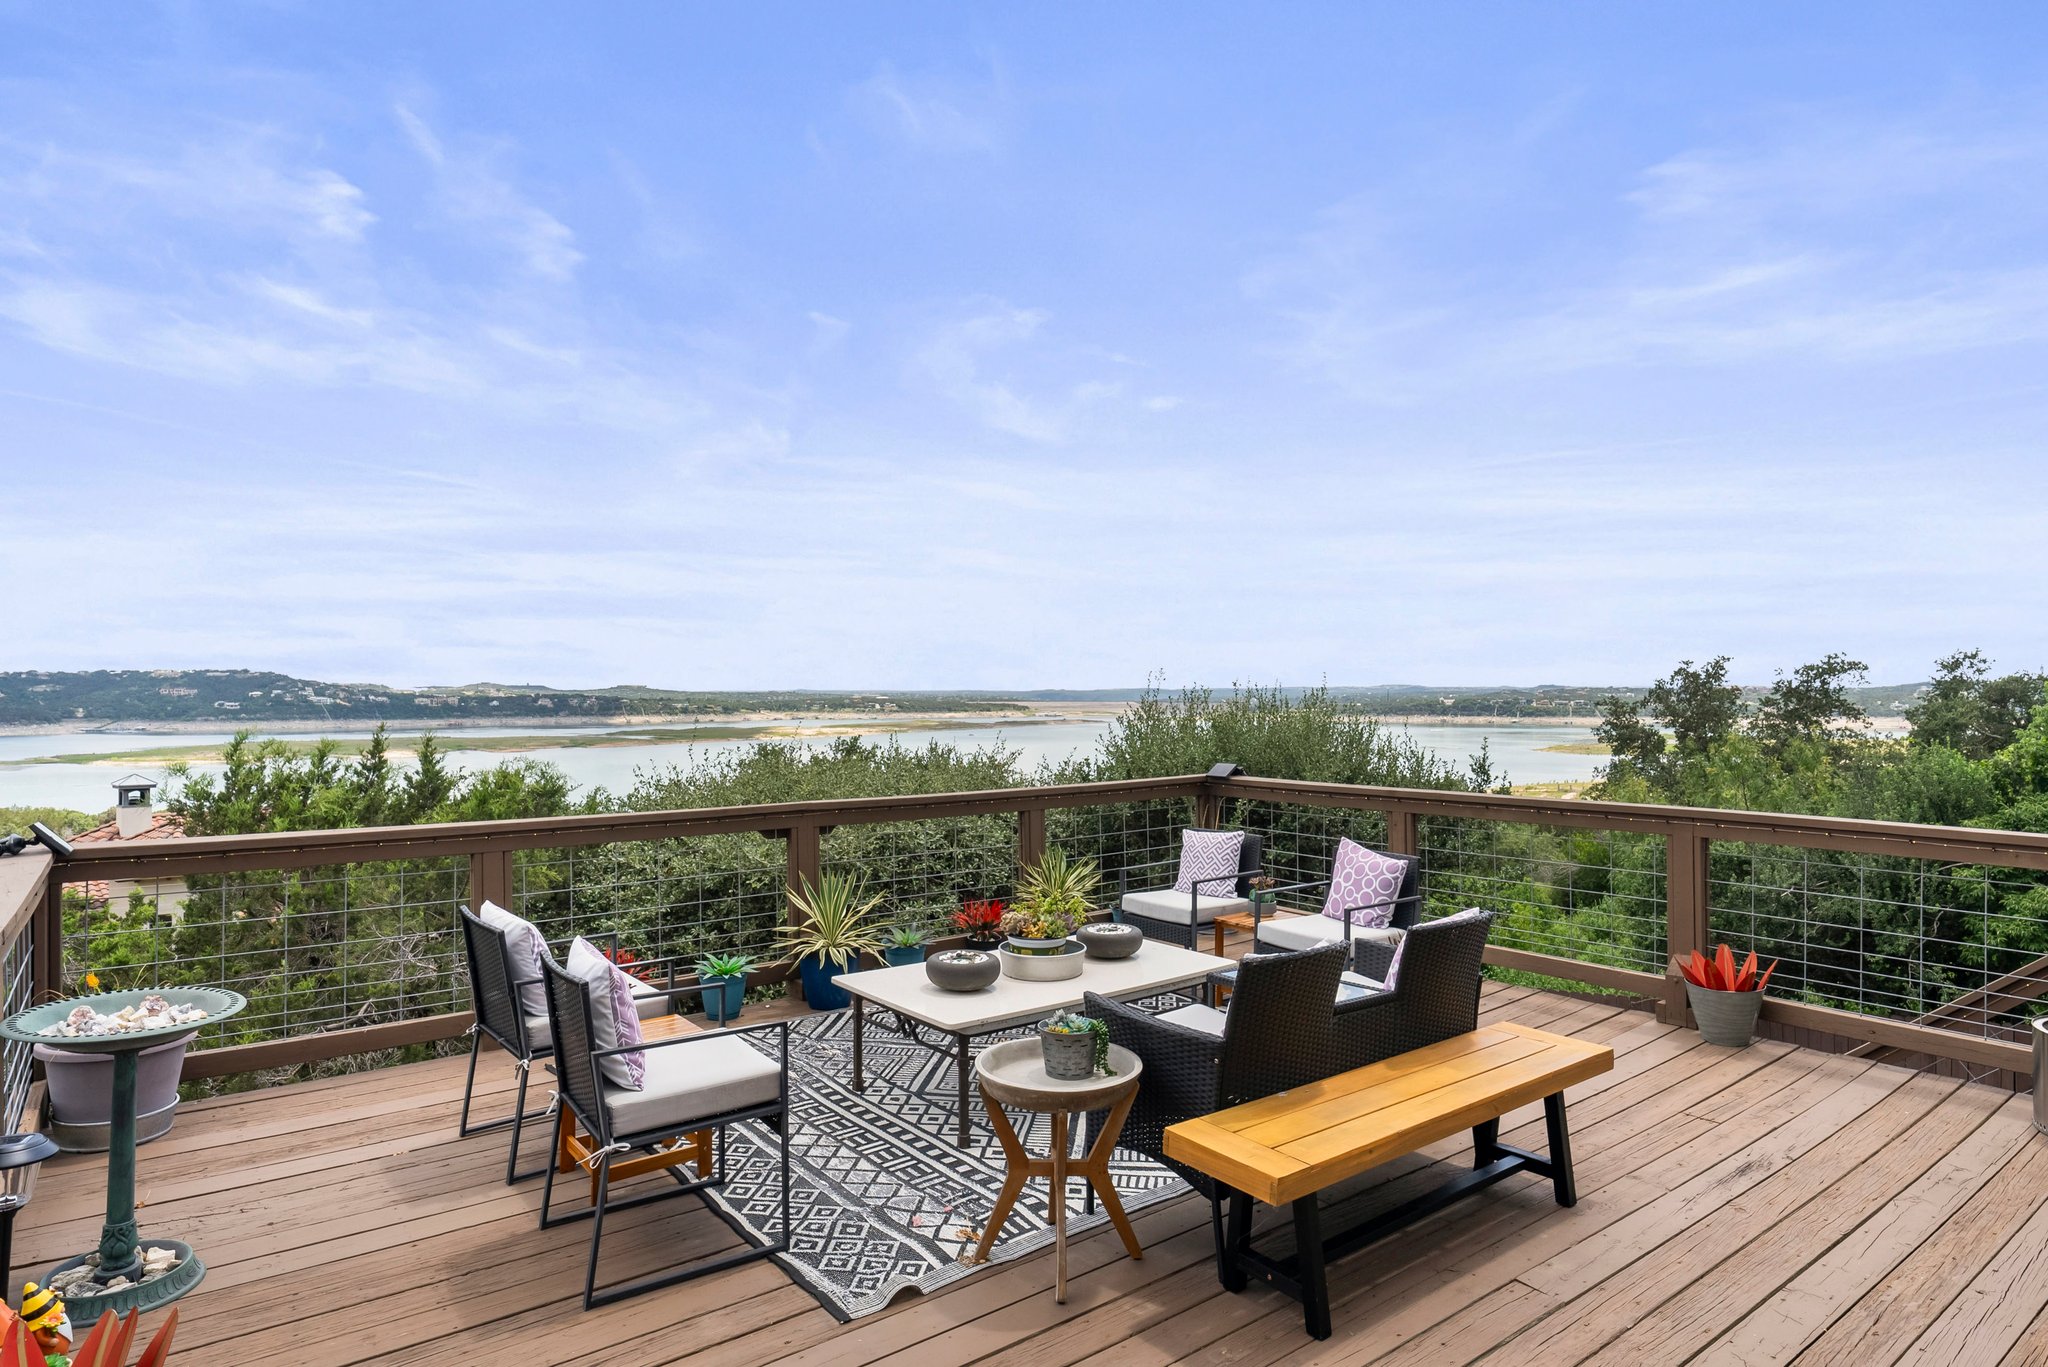 Entertain and dine on the back deck and soak in the gorgeous views of Lake Travis